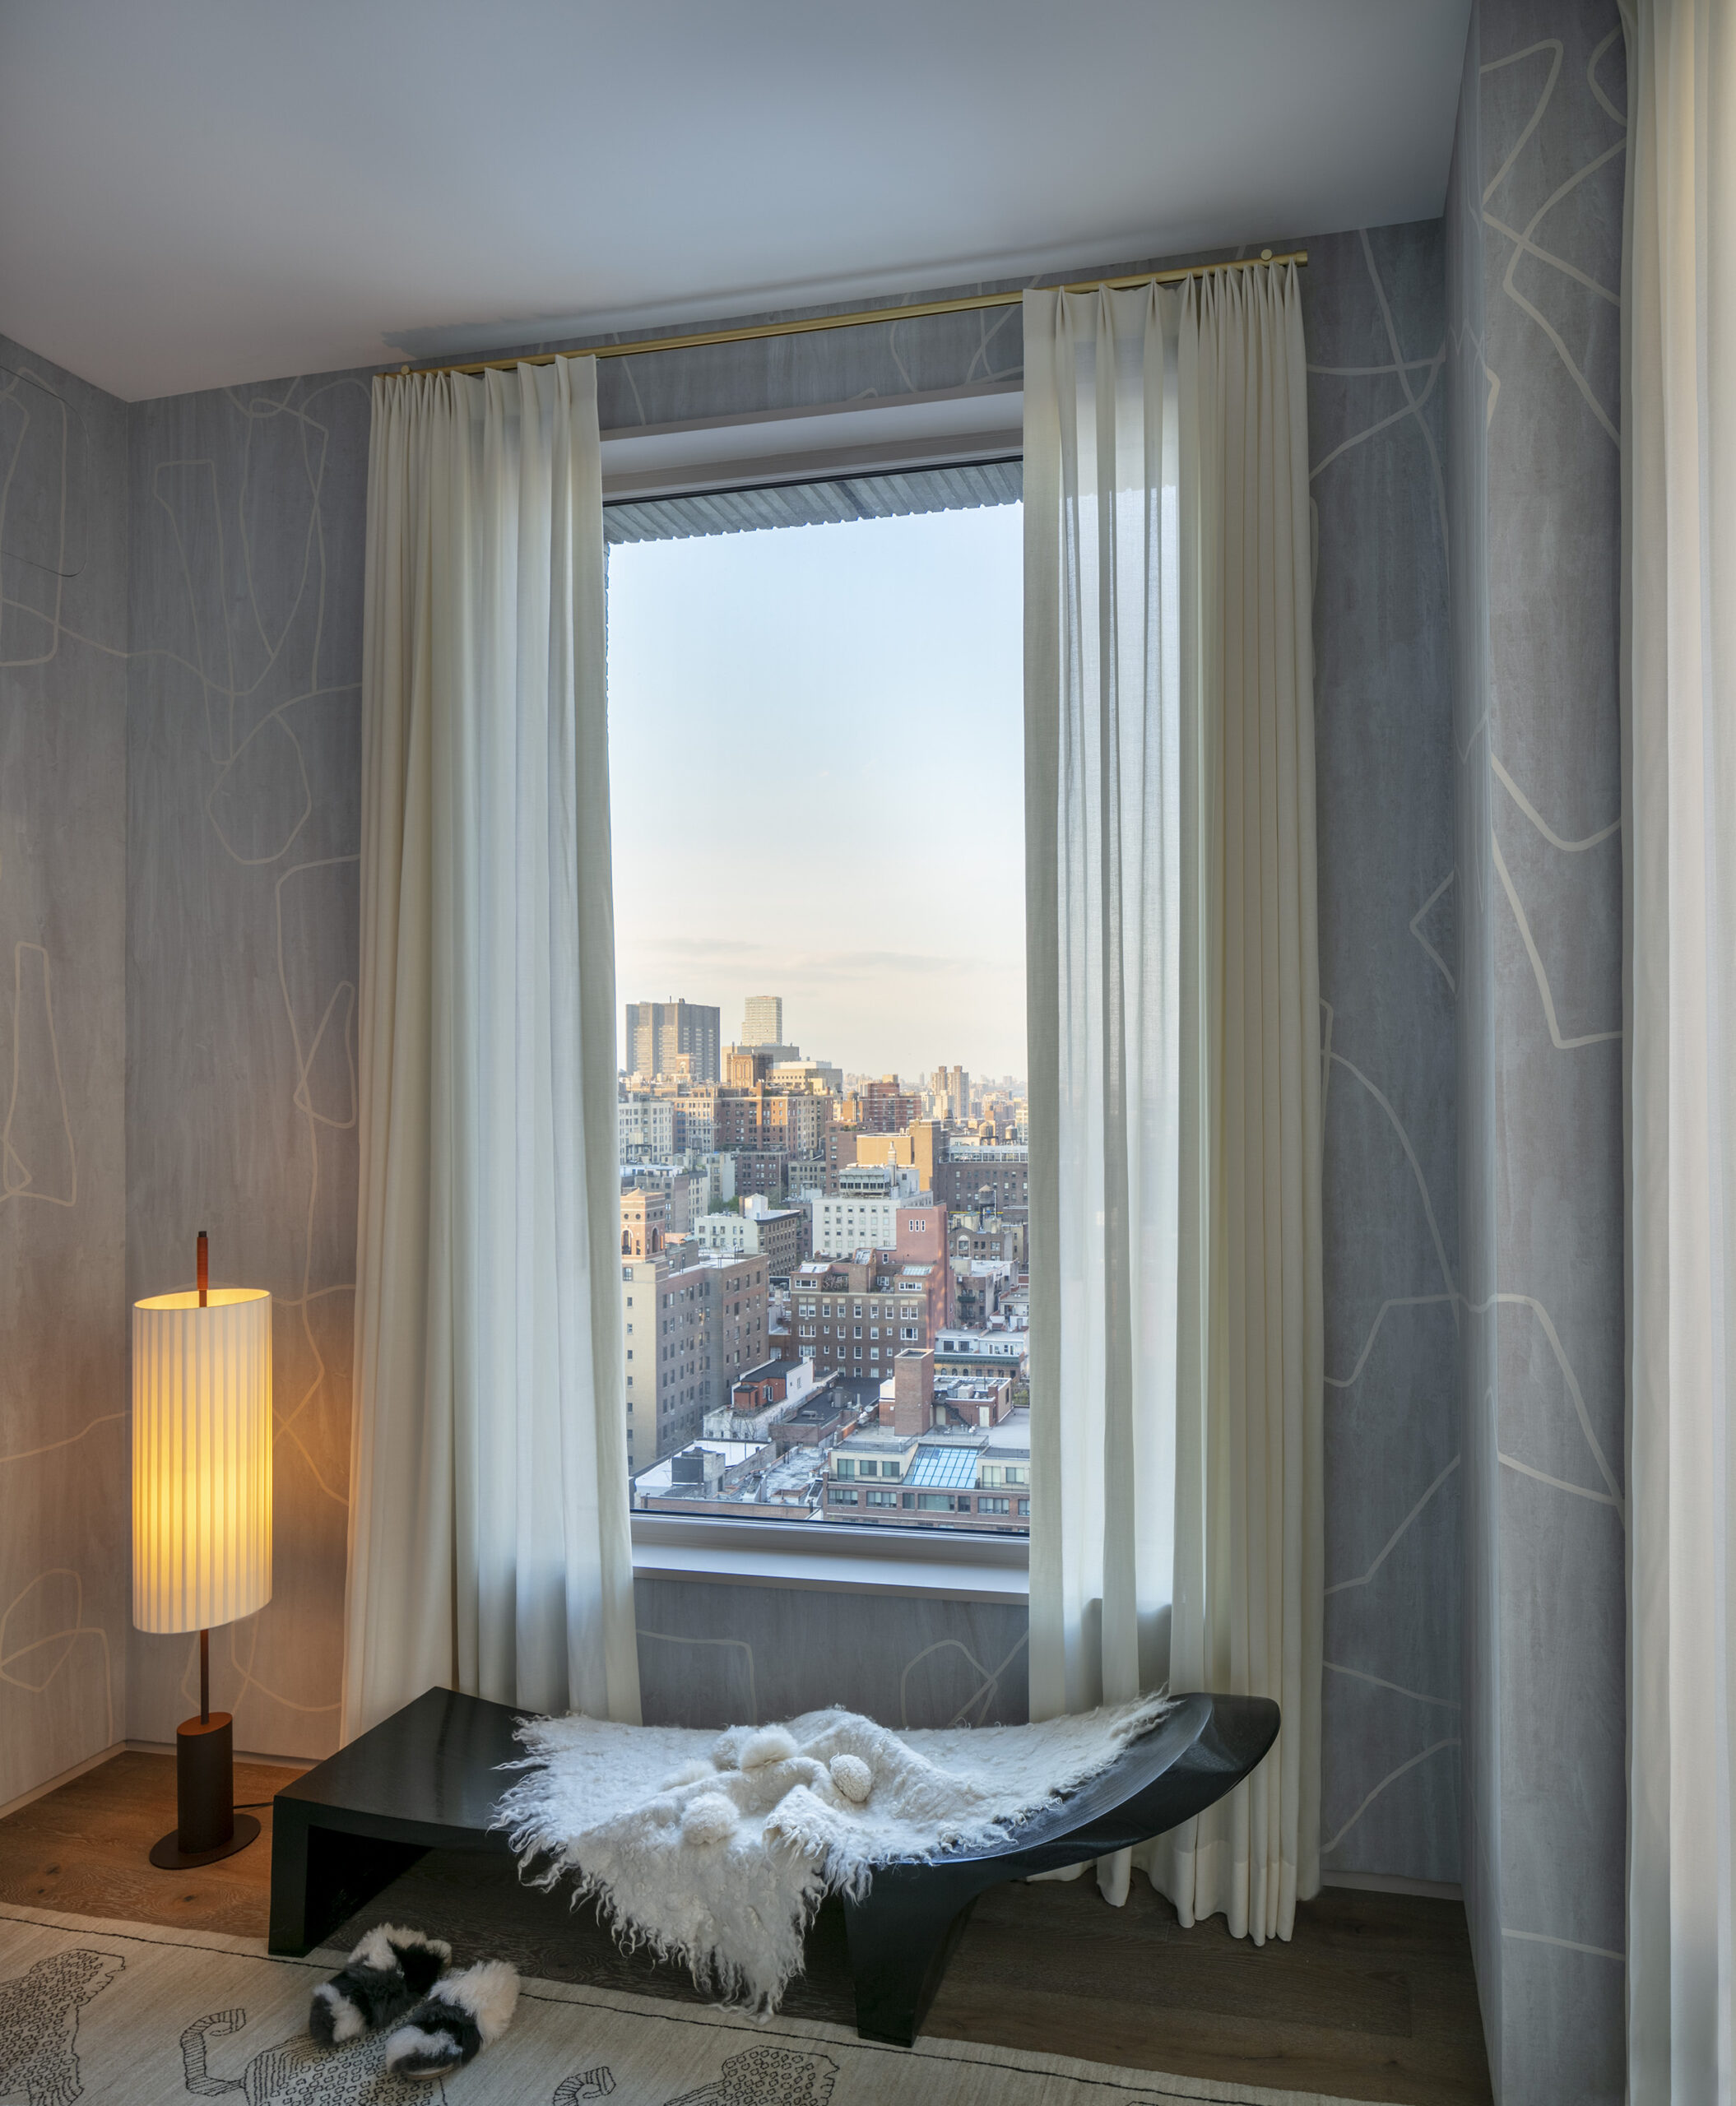 180 East 88th Street, Interiors designed by Hadas Dembo, Photos by Sean Hemmerle